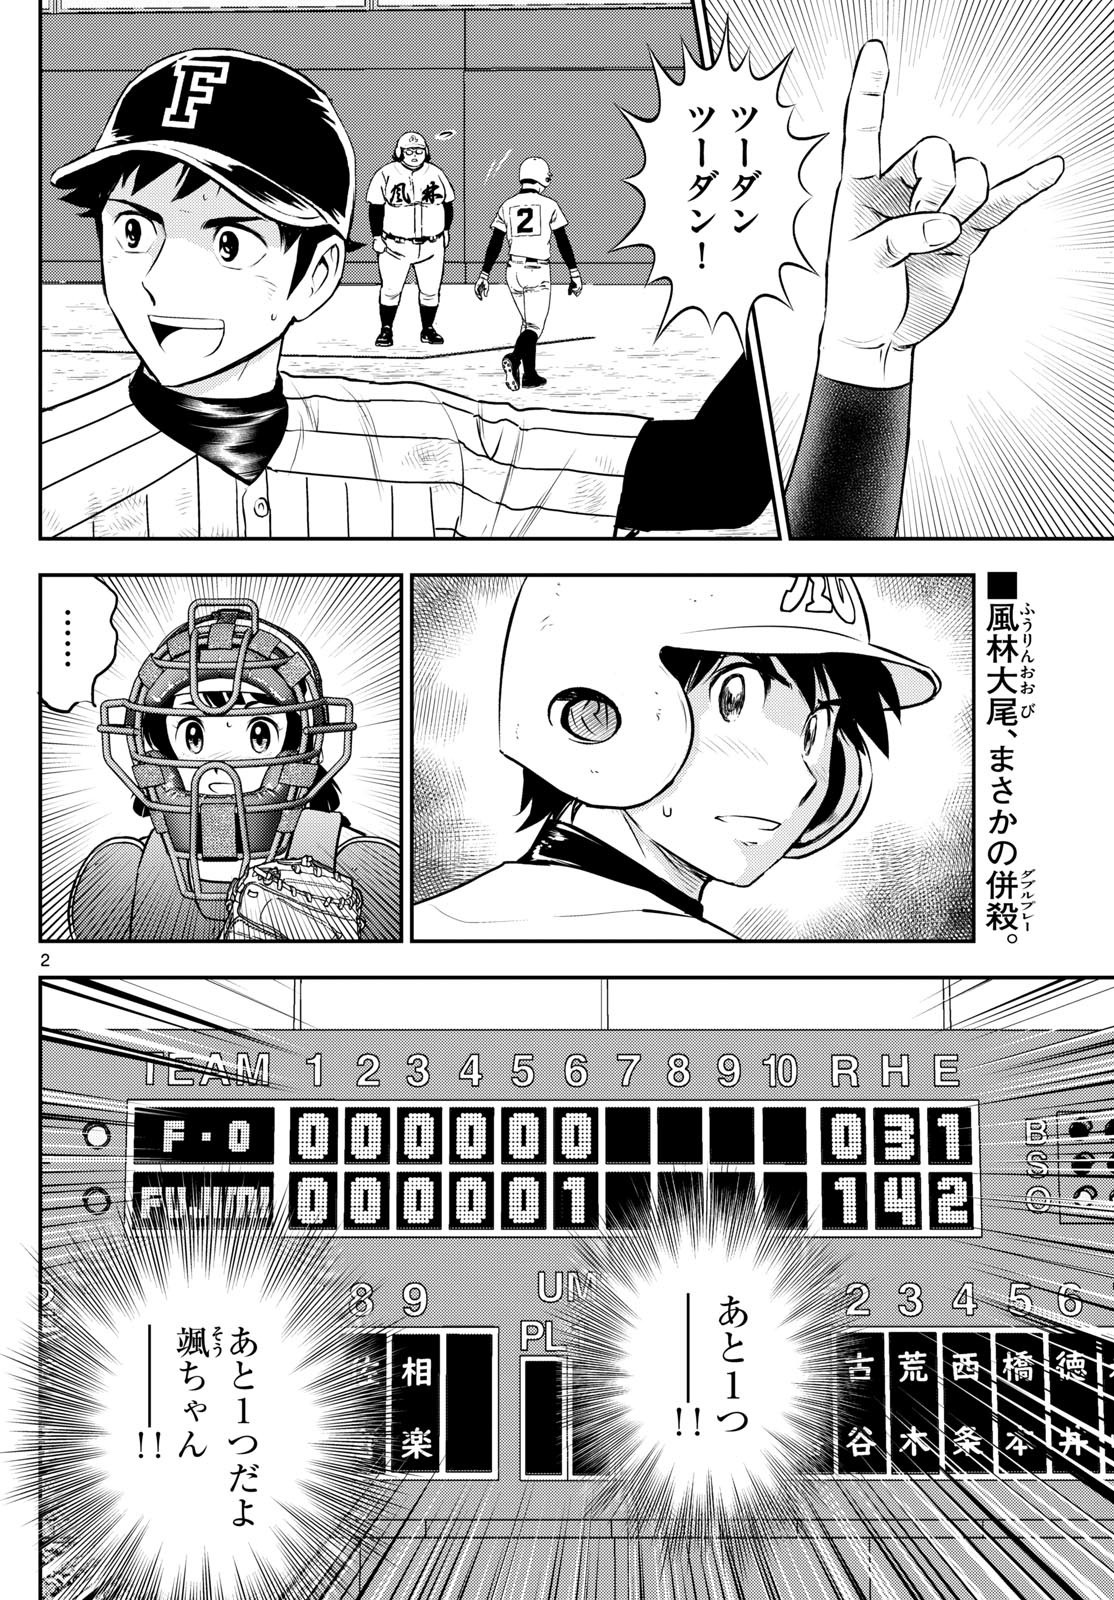 Major 2nd - メジャーセカンド - Chapter 275 - Page 2